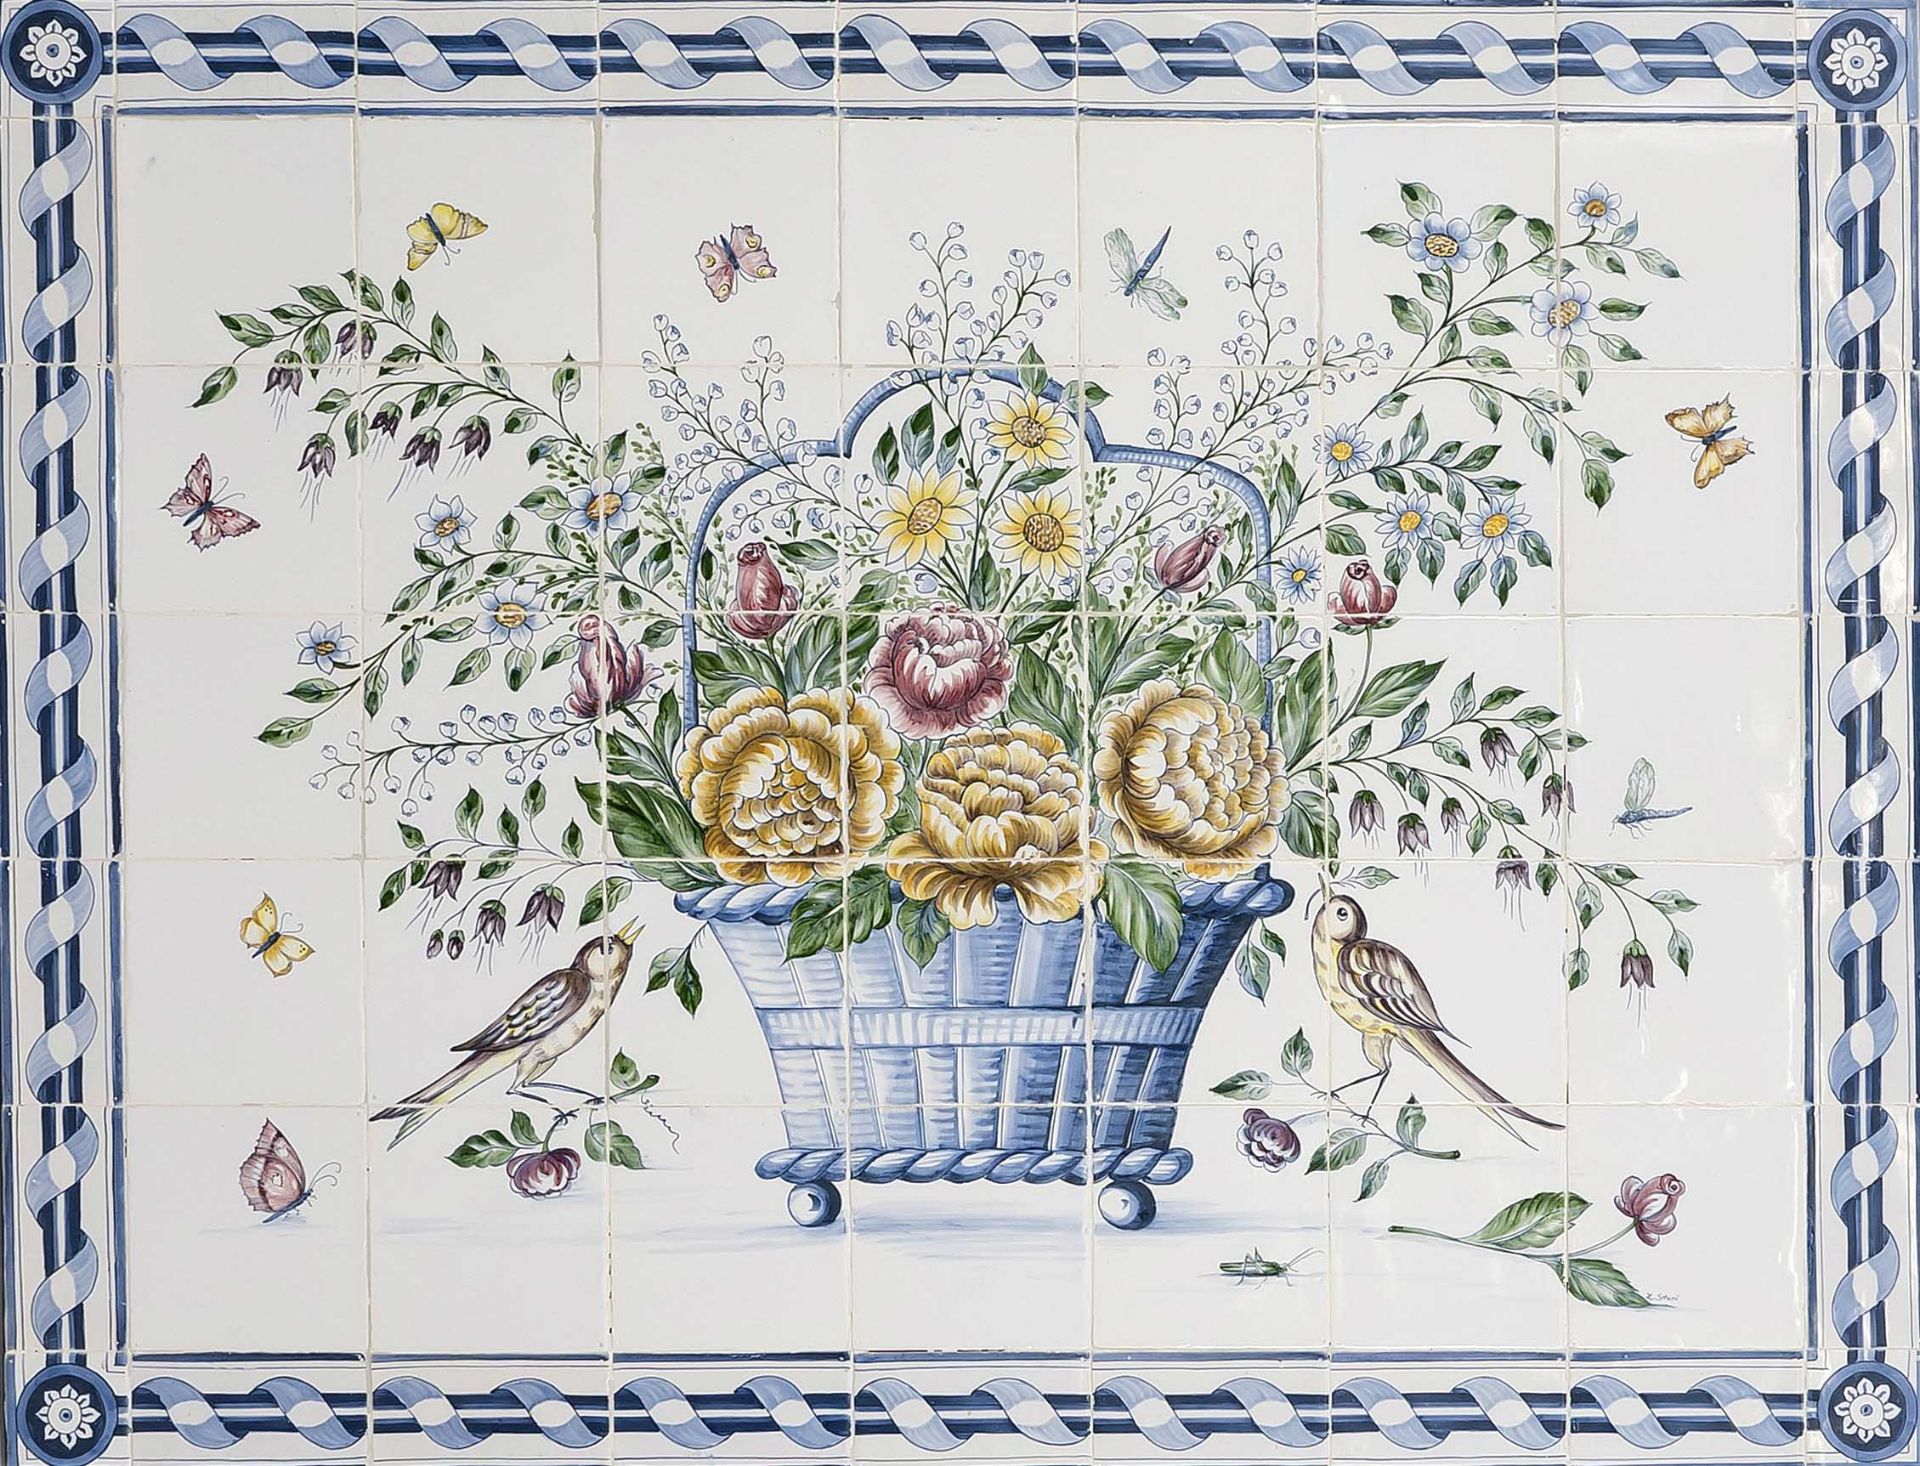 Tile picture, probably Holland. Large flower basket with birds and insects in polychrome and